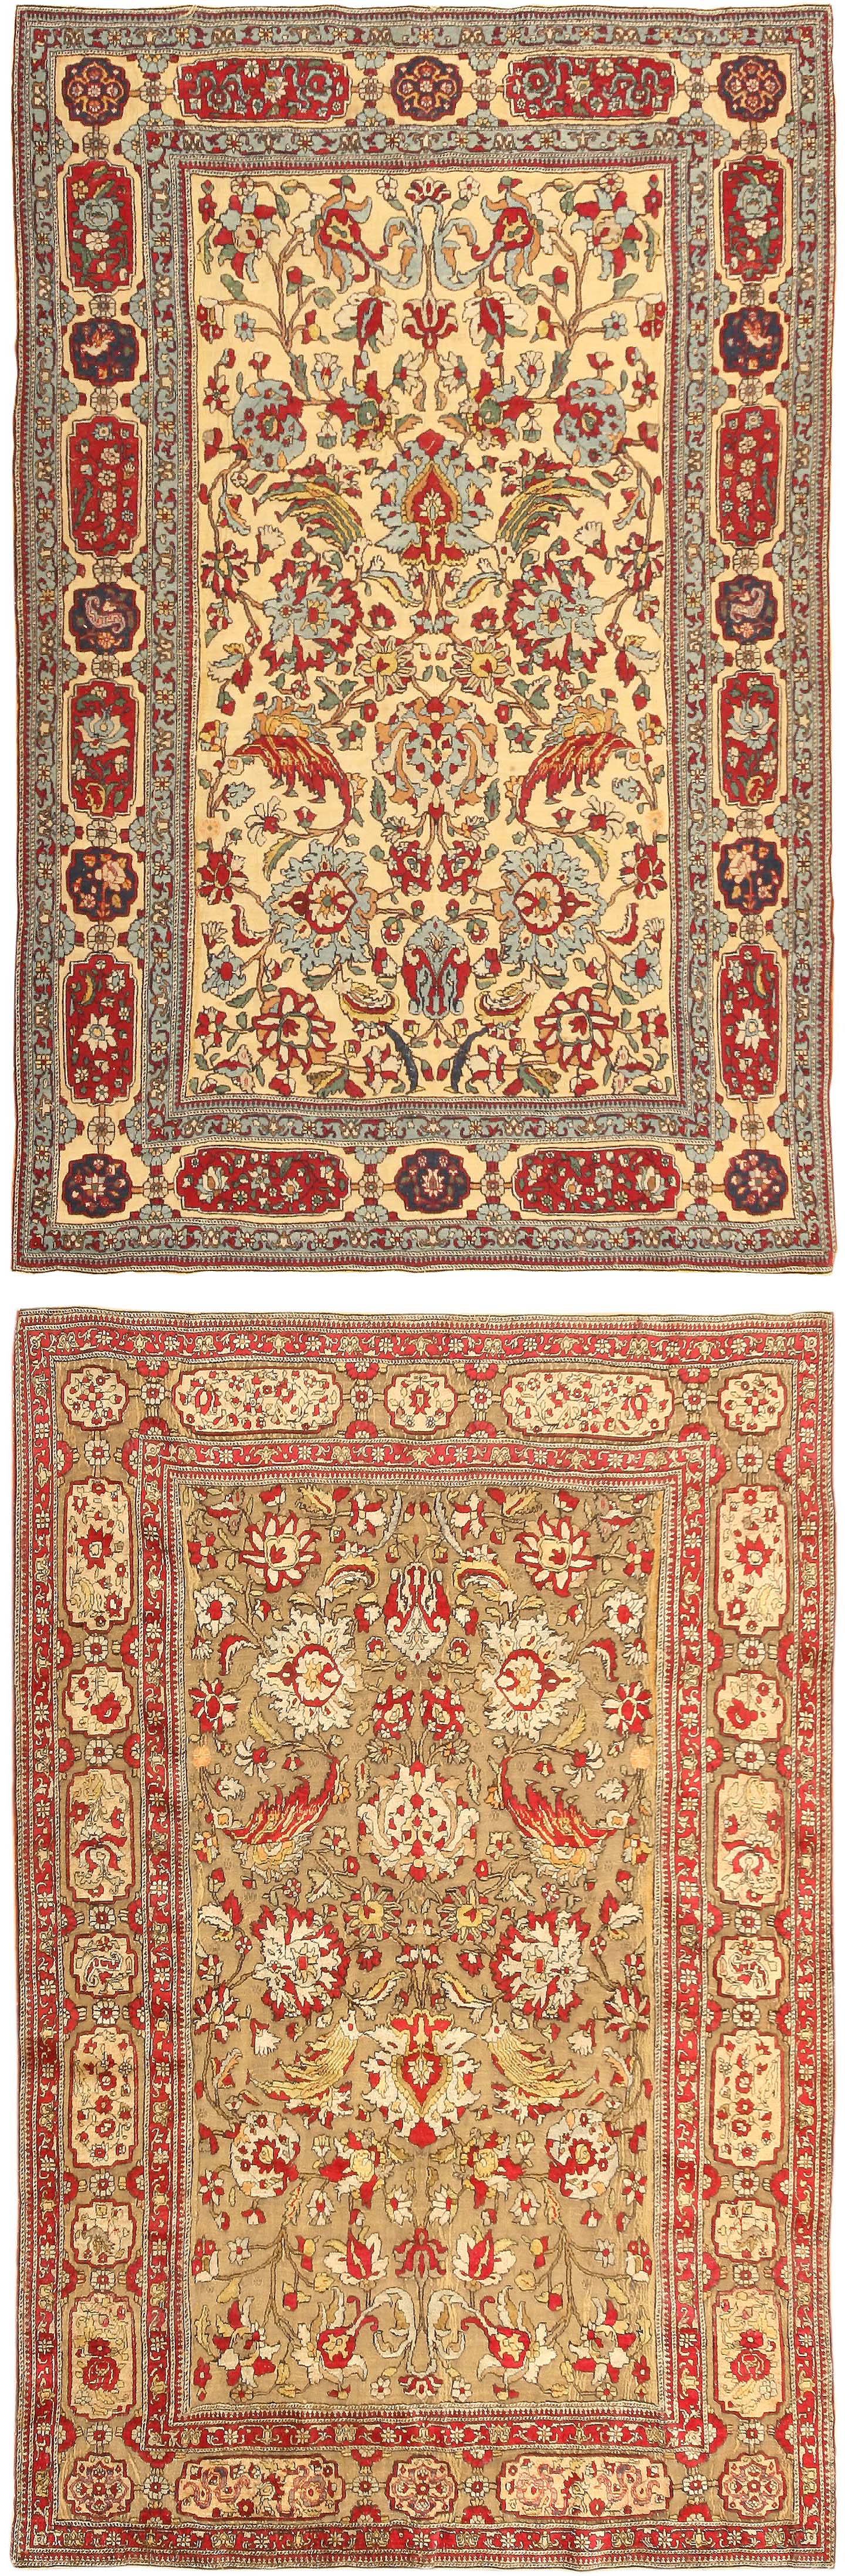 Antique Kashan Persian Rug with Metallic Threading 40943 For Sale